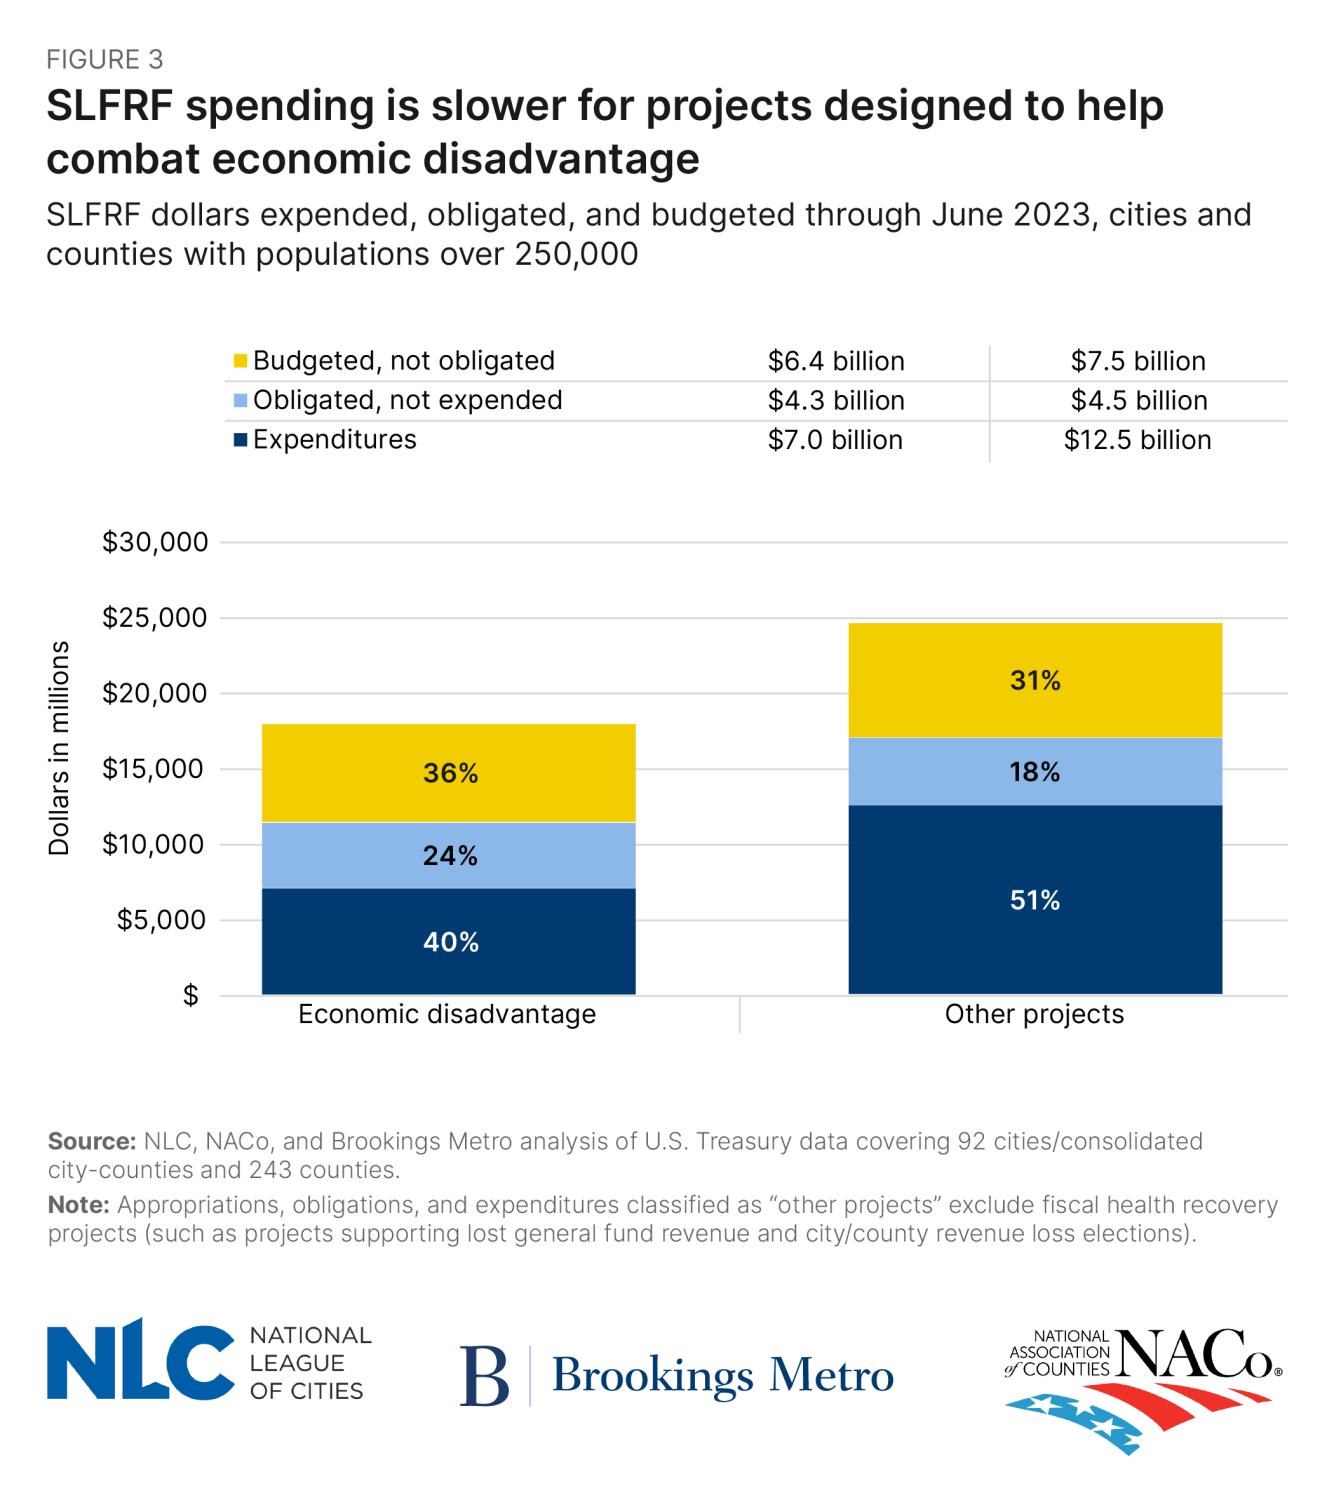 Figure 3: SLFRF spending is slower for projects designed to help combat economic disadvantage